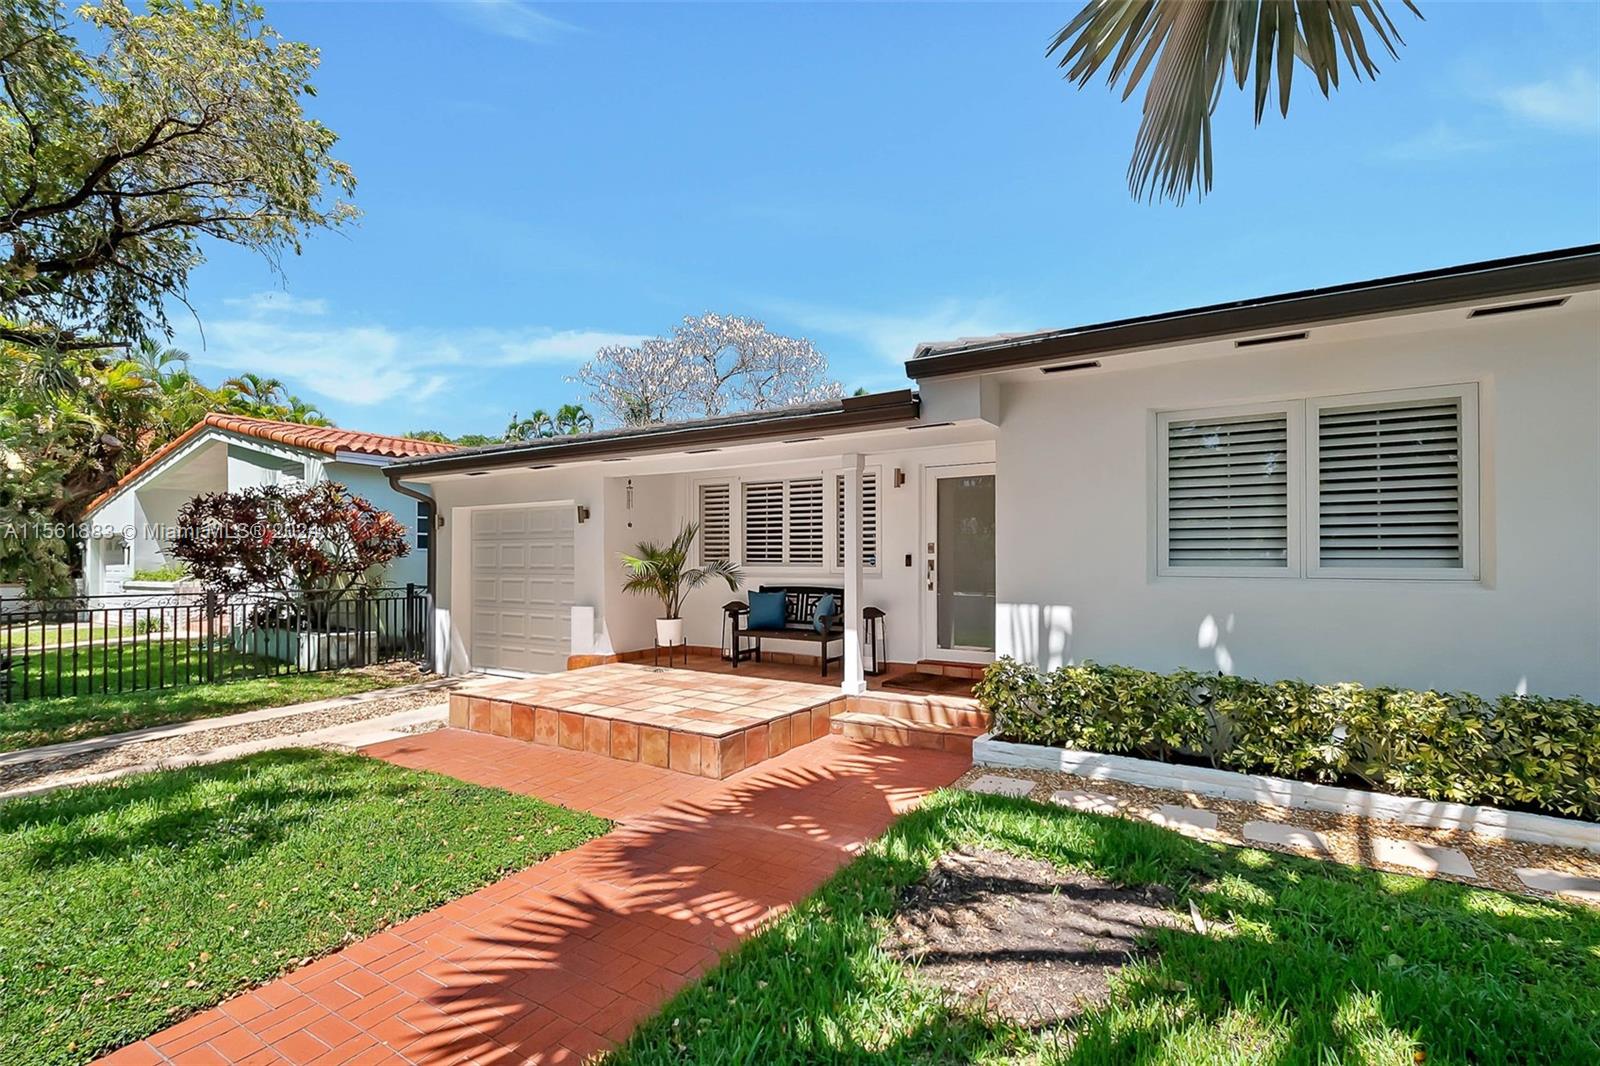 1221 Aguila Ave, Coral Gables, Florida, 33134, United States, 2 Bedrooms Bedrooms, ,3 BathroomsBathrooms,Residential,For Sale,1221 Aguila Ave,1504403